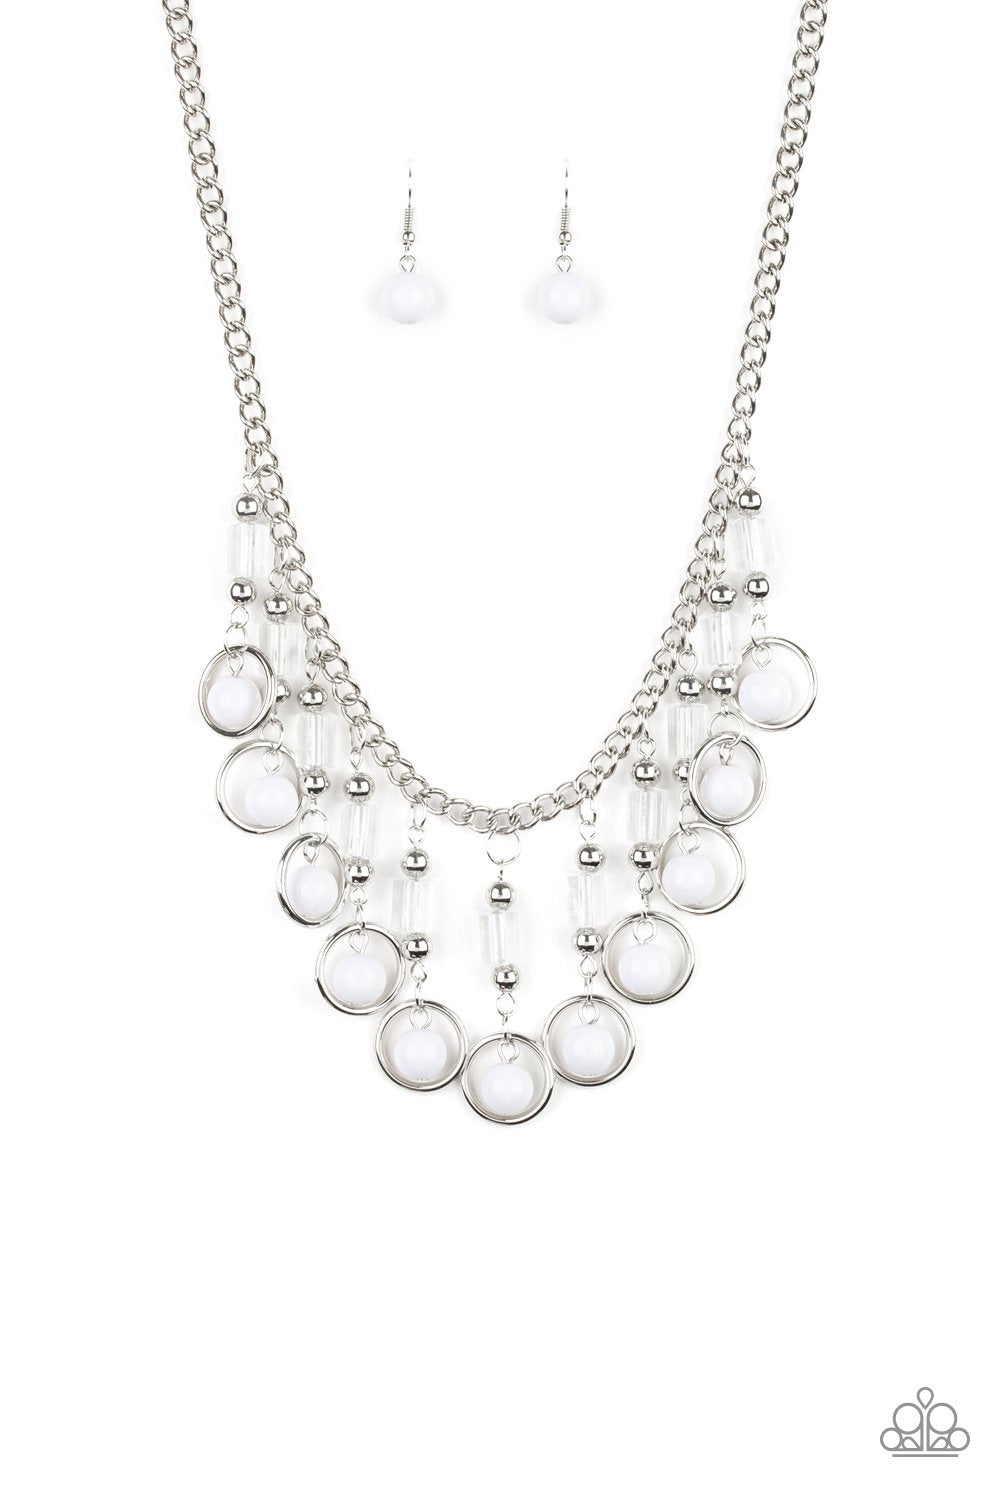 Cool Cascade White
Necklace - Daria's Blings N Things